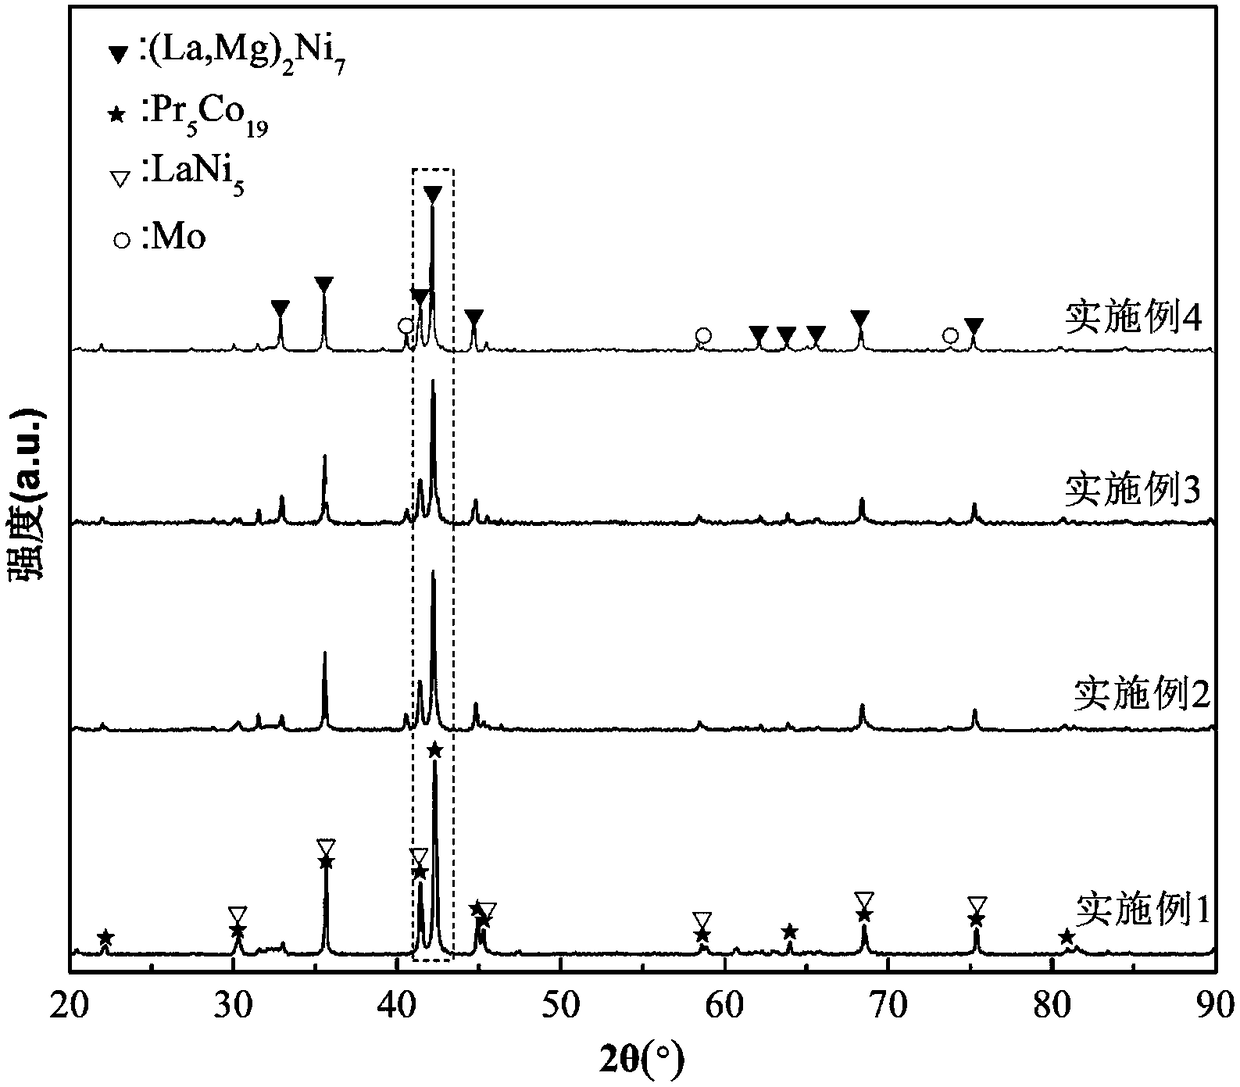 La-mg-ni series hydrogen storage alloy for nickel-hydrogen battery and preparation method thereof